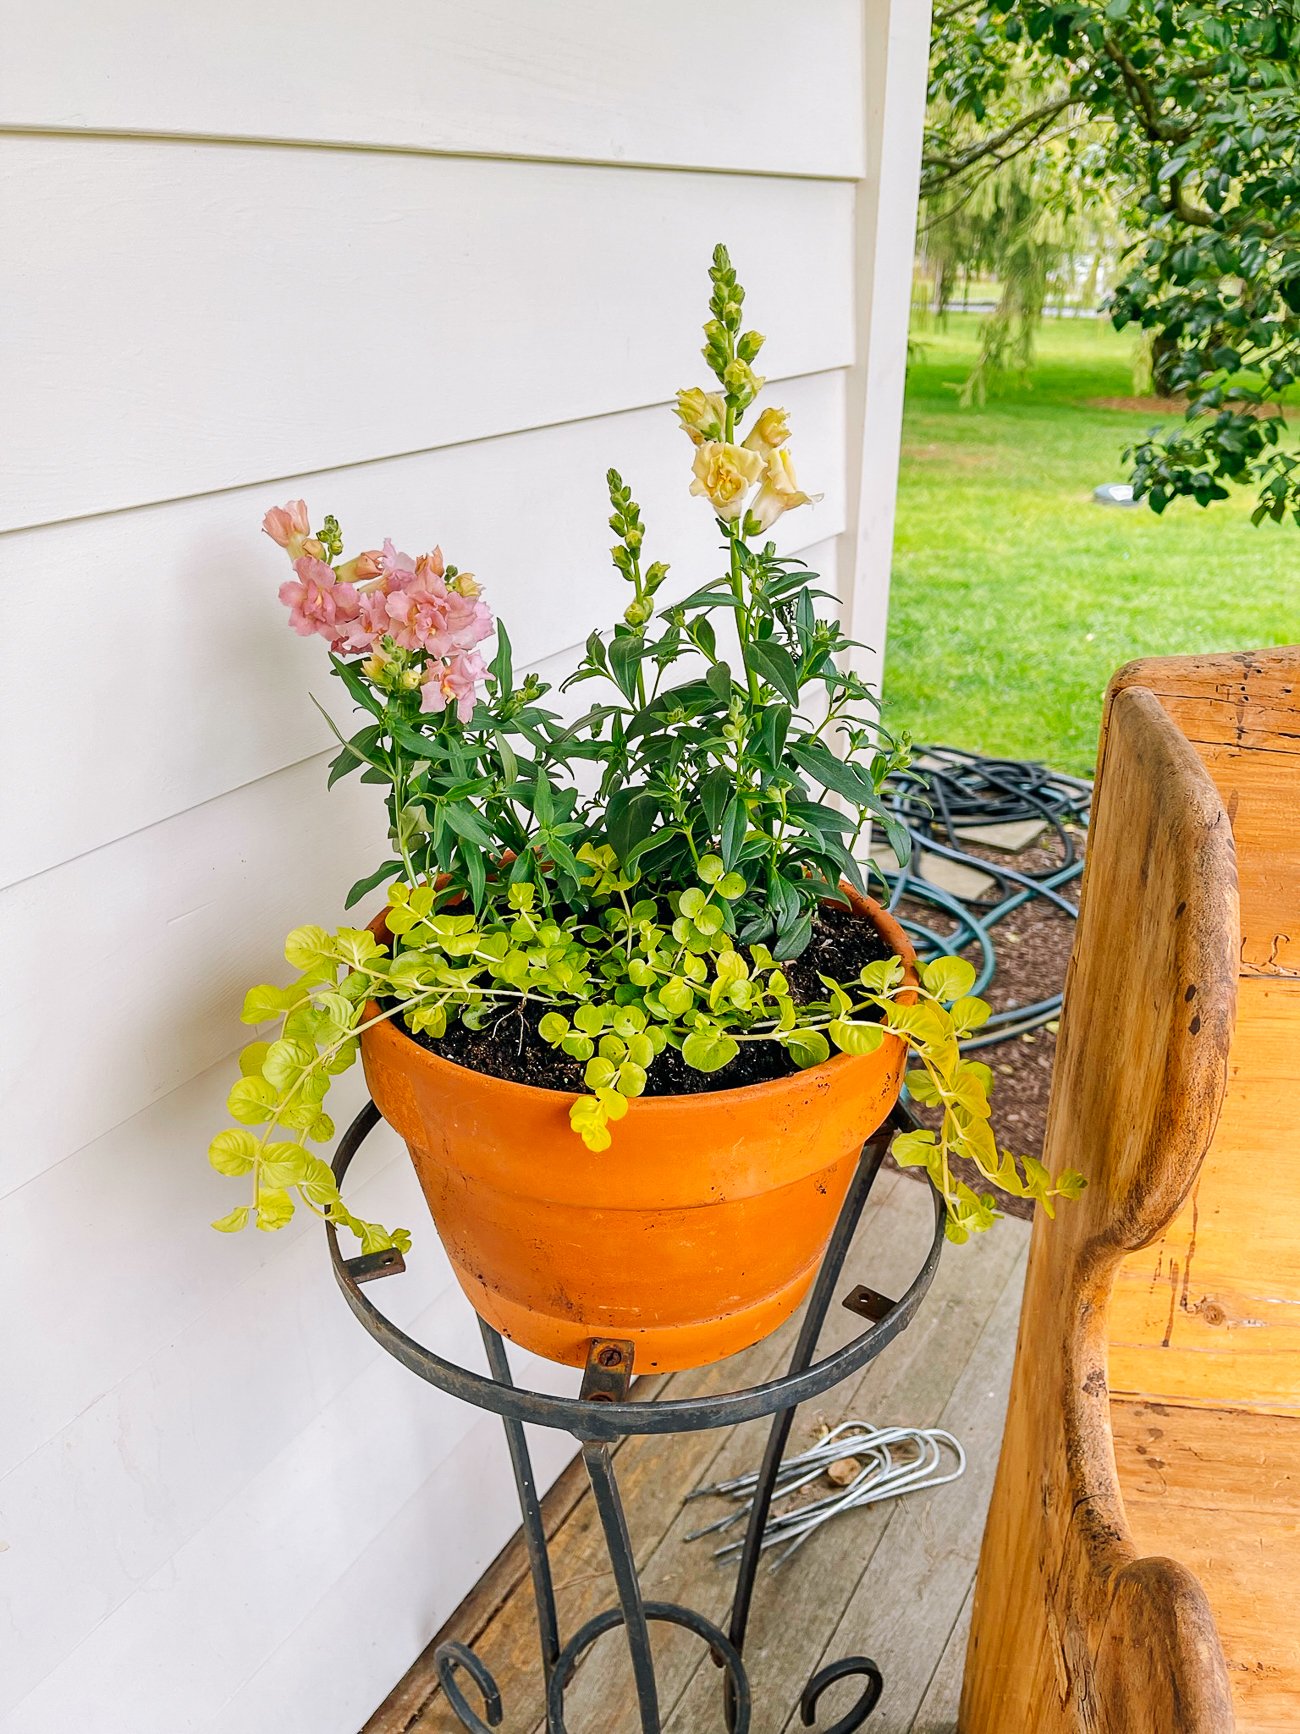 snapdragons and creeping jenny in pot